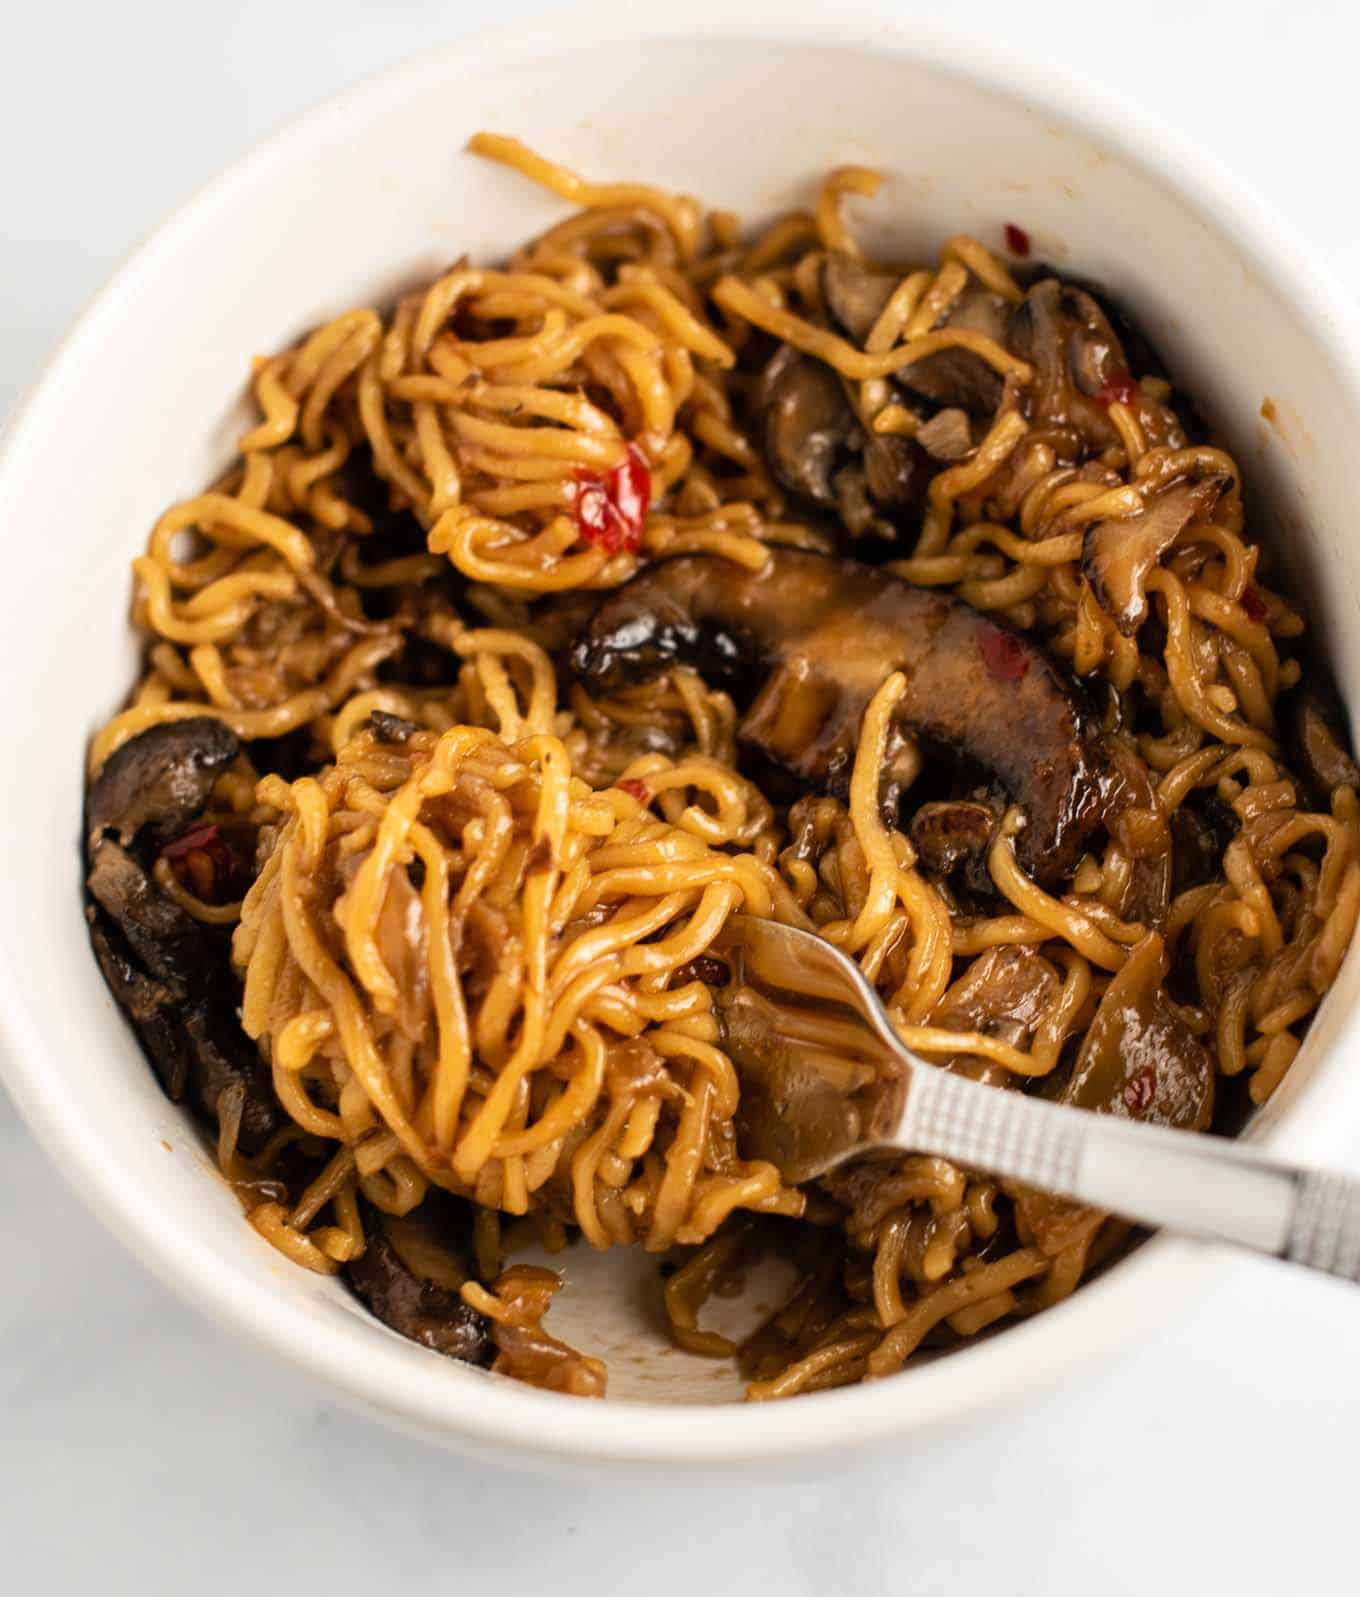 stir fry noodles with mushrooms and sweet chili sauce in a white bowl